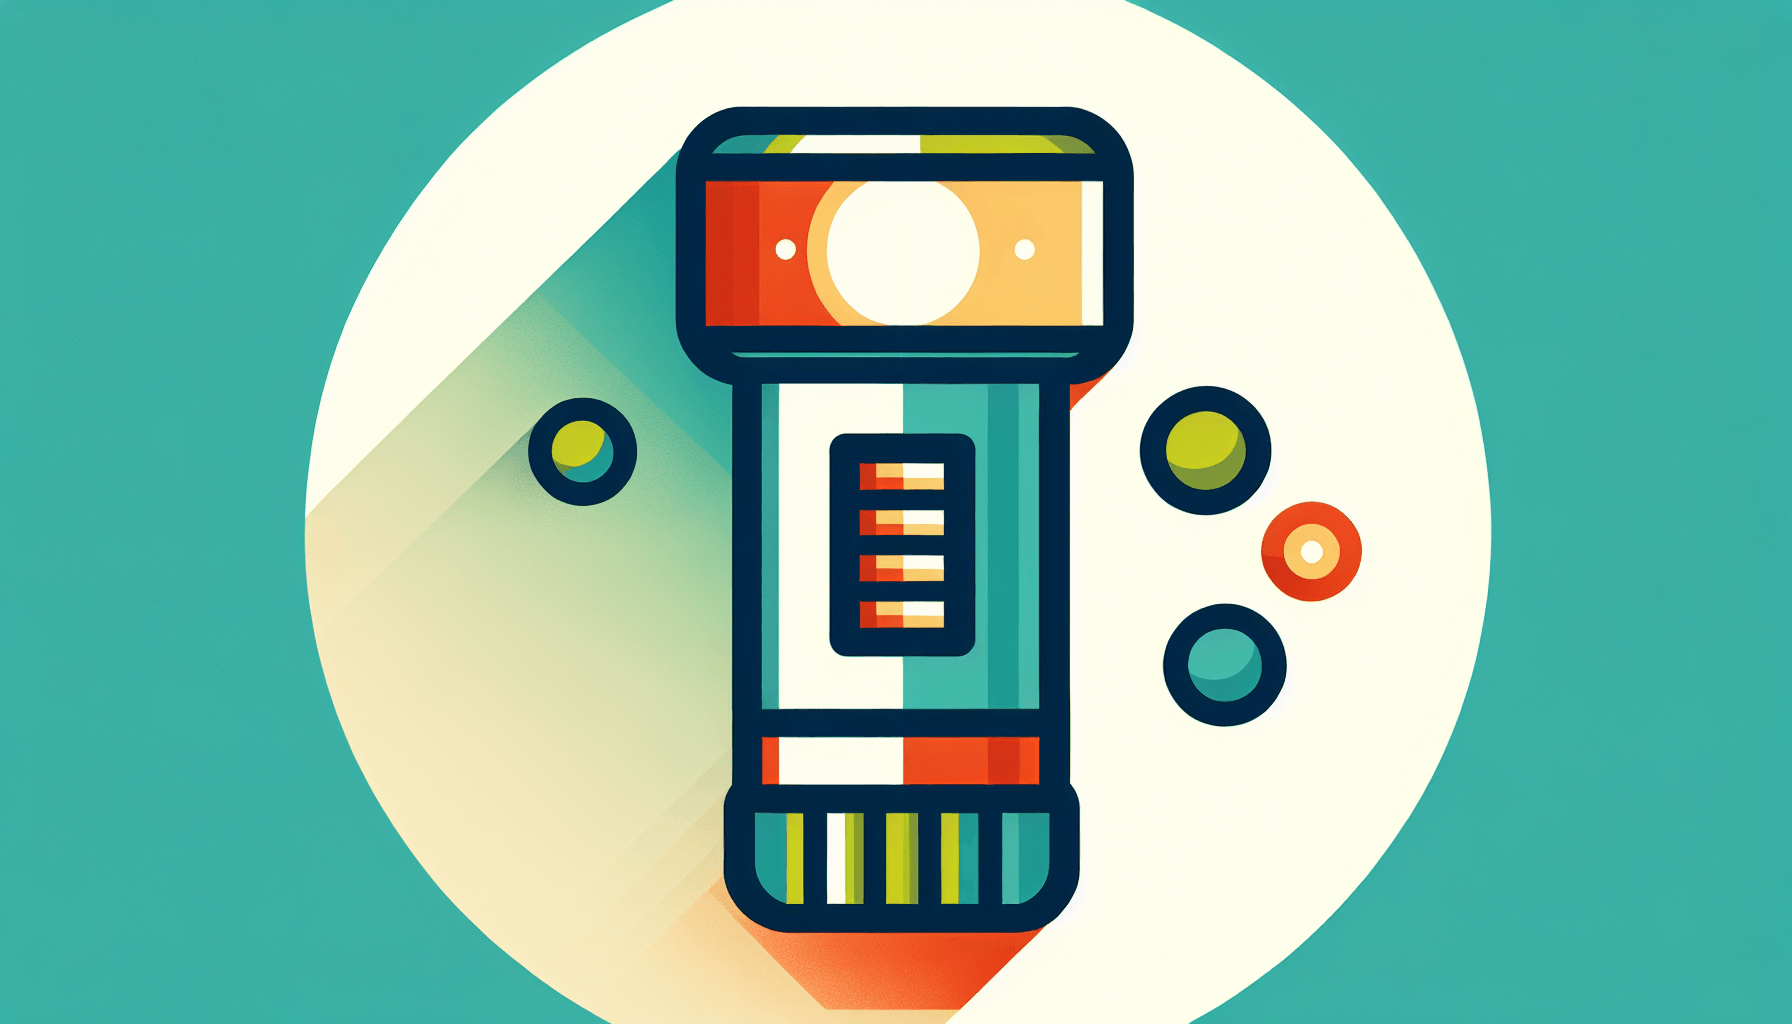 Flashlight in flat illustration style and white background, red #f47574, green #88c7a8, yellow #fcc44b, and blue #645bc8 colors.